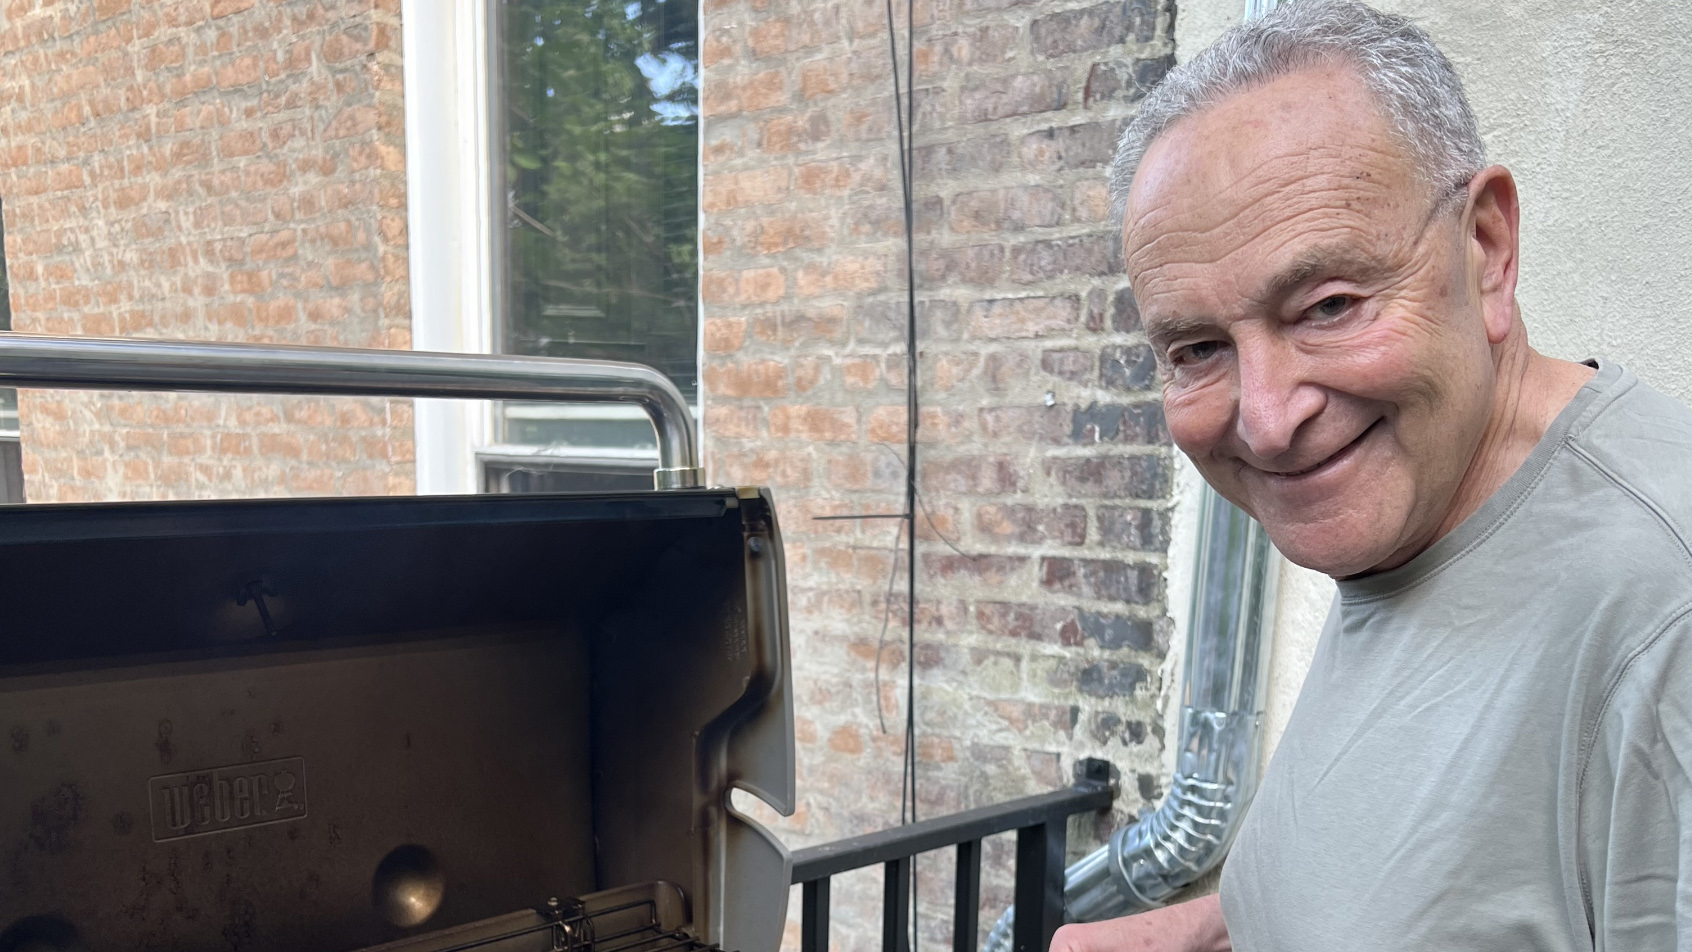 Schumer Ridiculed for Grilling Photo, Deletes It After Backlash